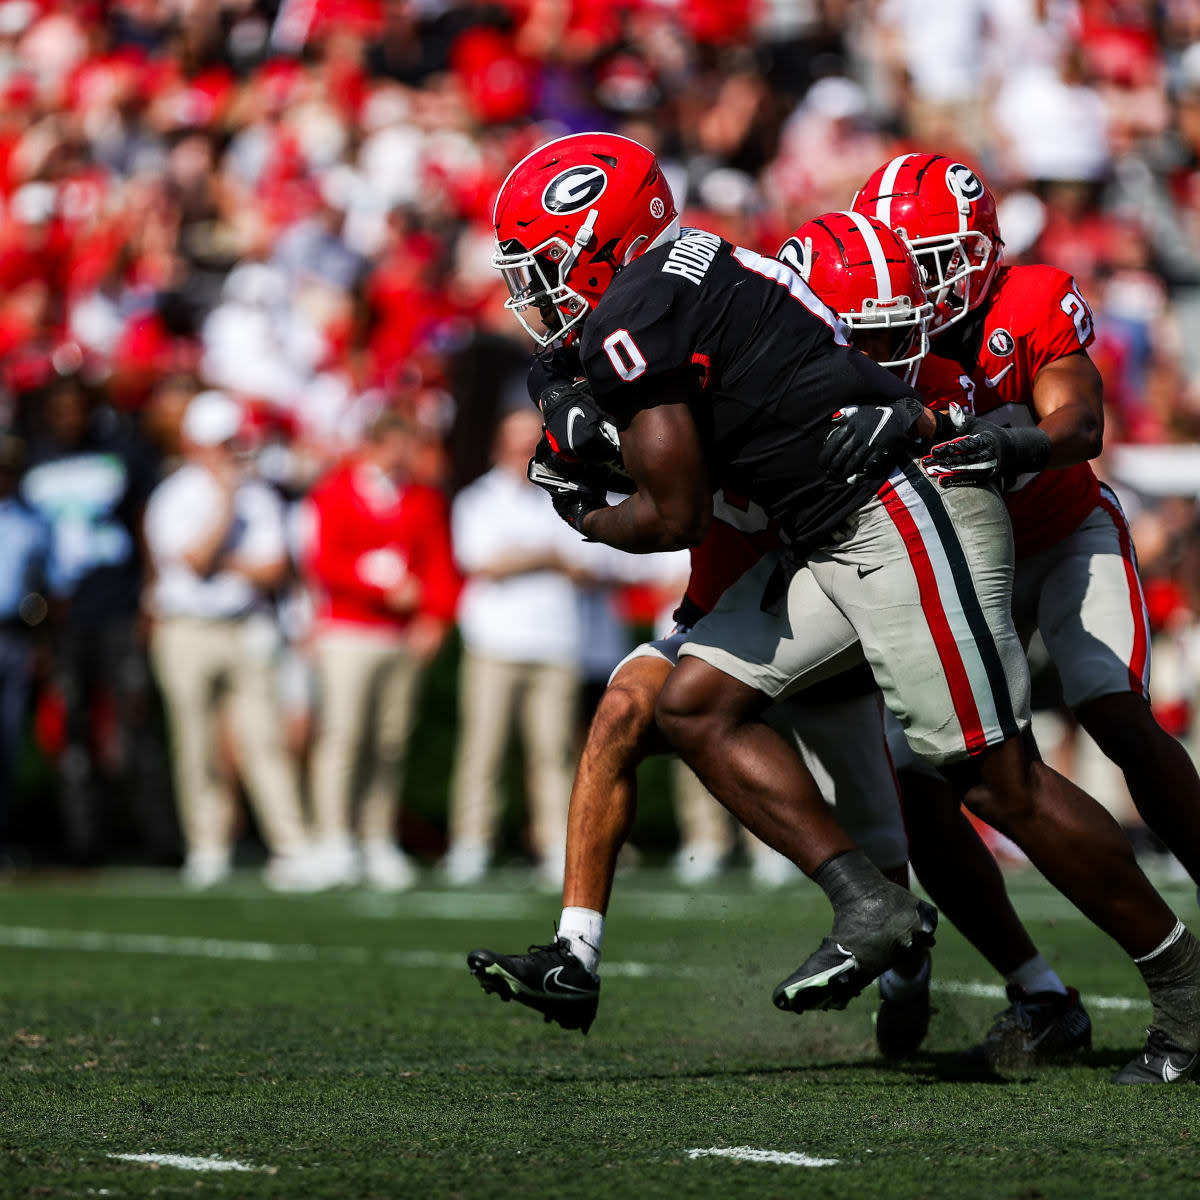 Georgia freshman running back Roderick Robinson carries tacklers during Georgia's 2023 "G-Day" spring game. Robinson has impressed since arriving on campus and is in line to receive carries early in the season. Photo VIA Tony Walsh